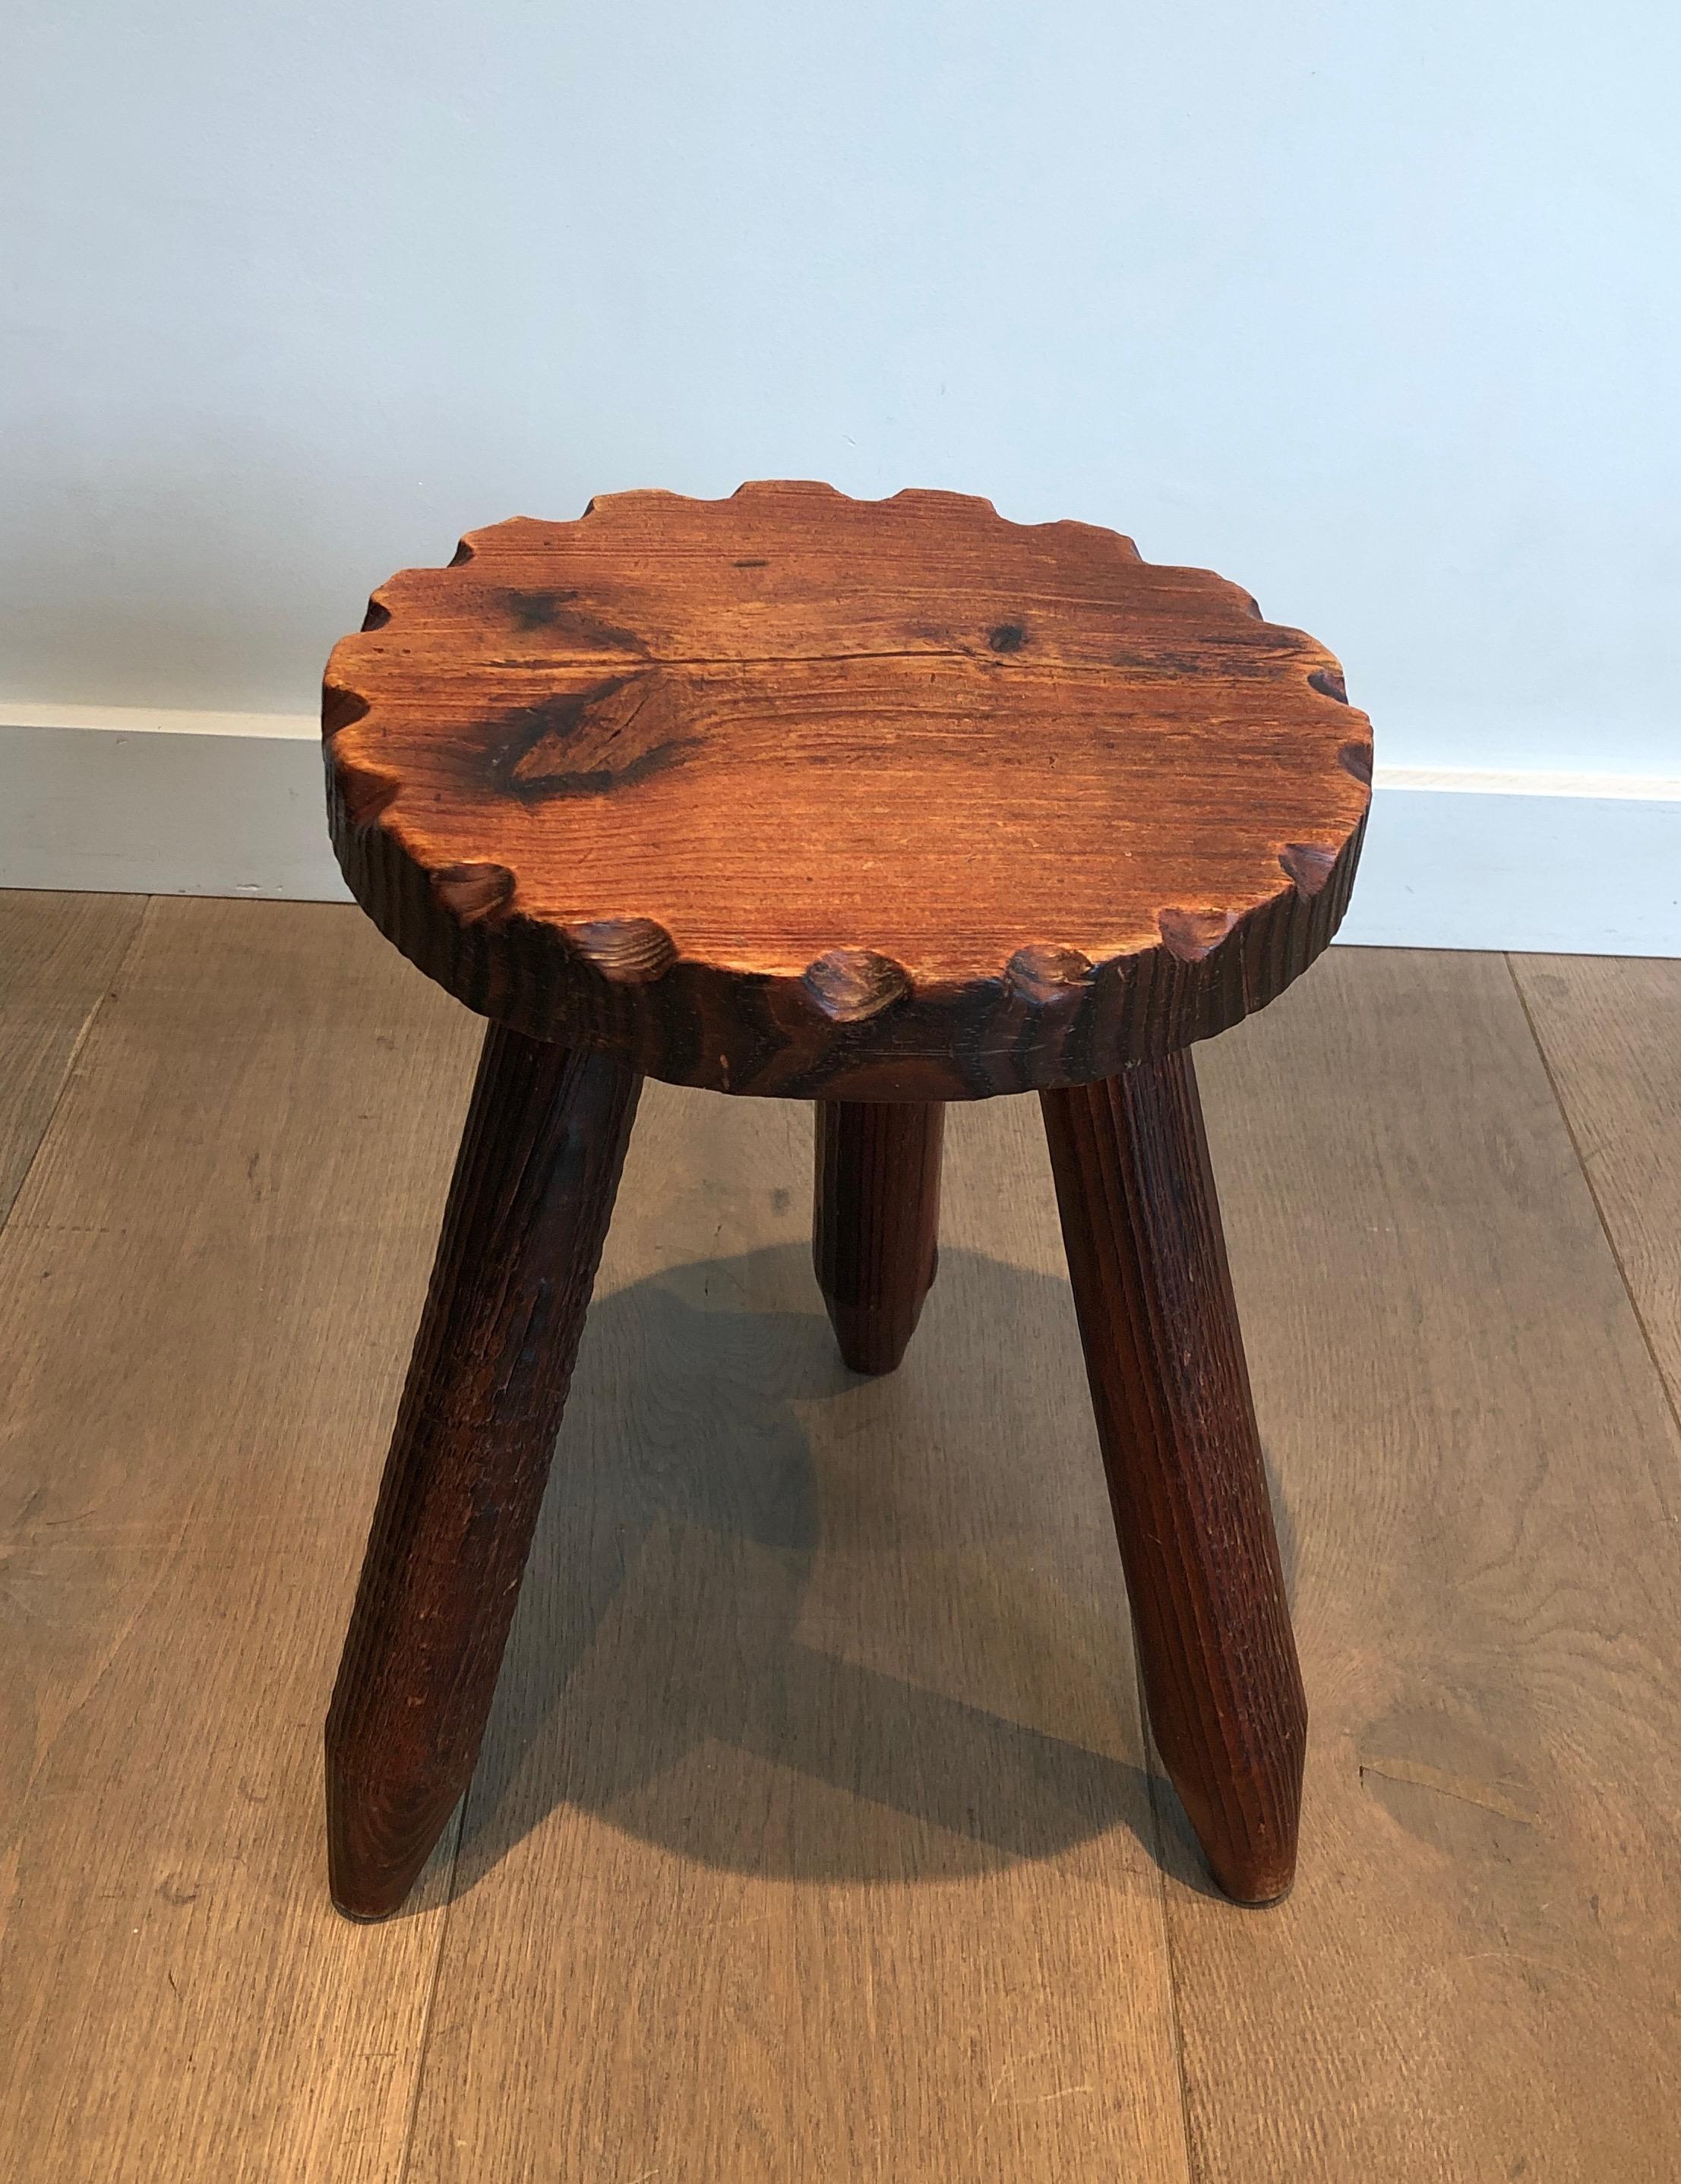 Pair of Pine Brutalist Stools, French Work, circa 1950 For Sale 3